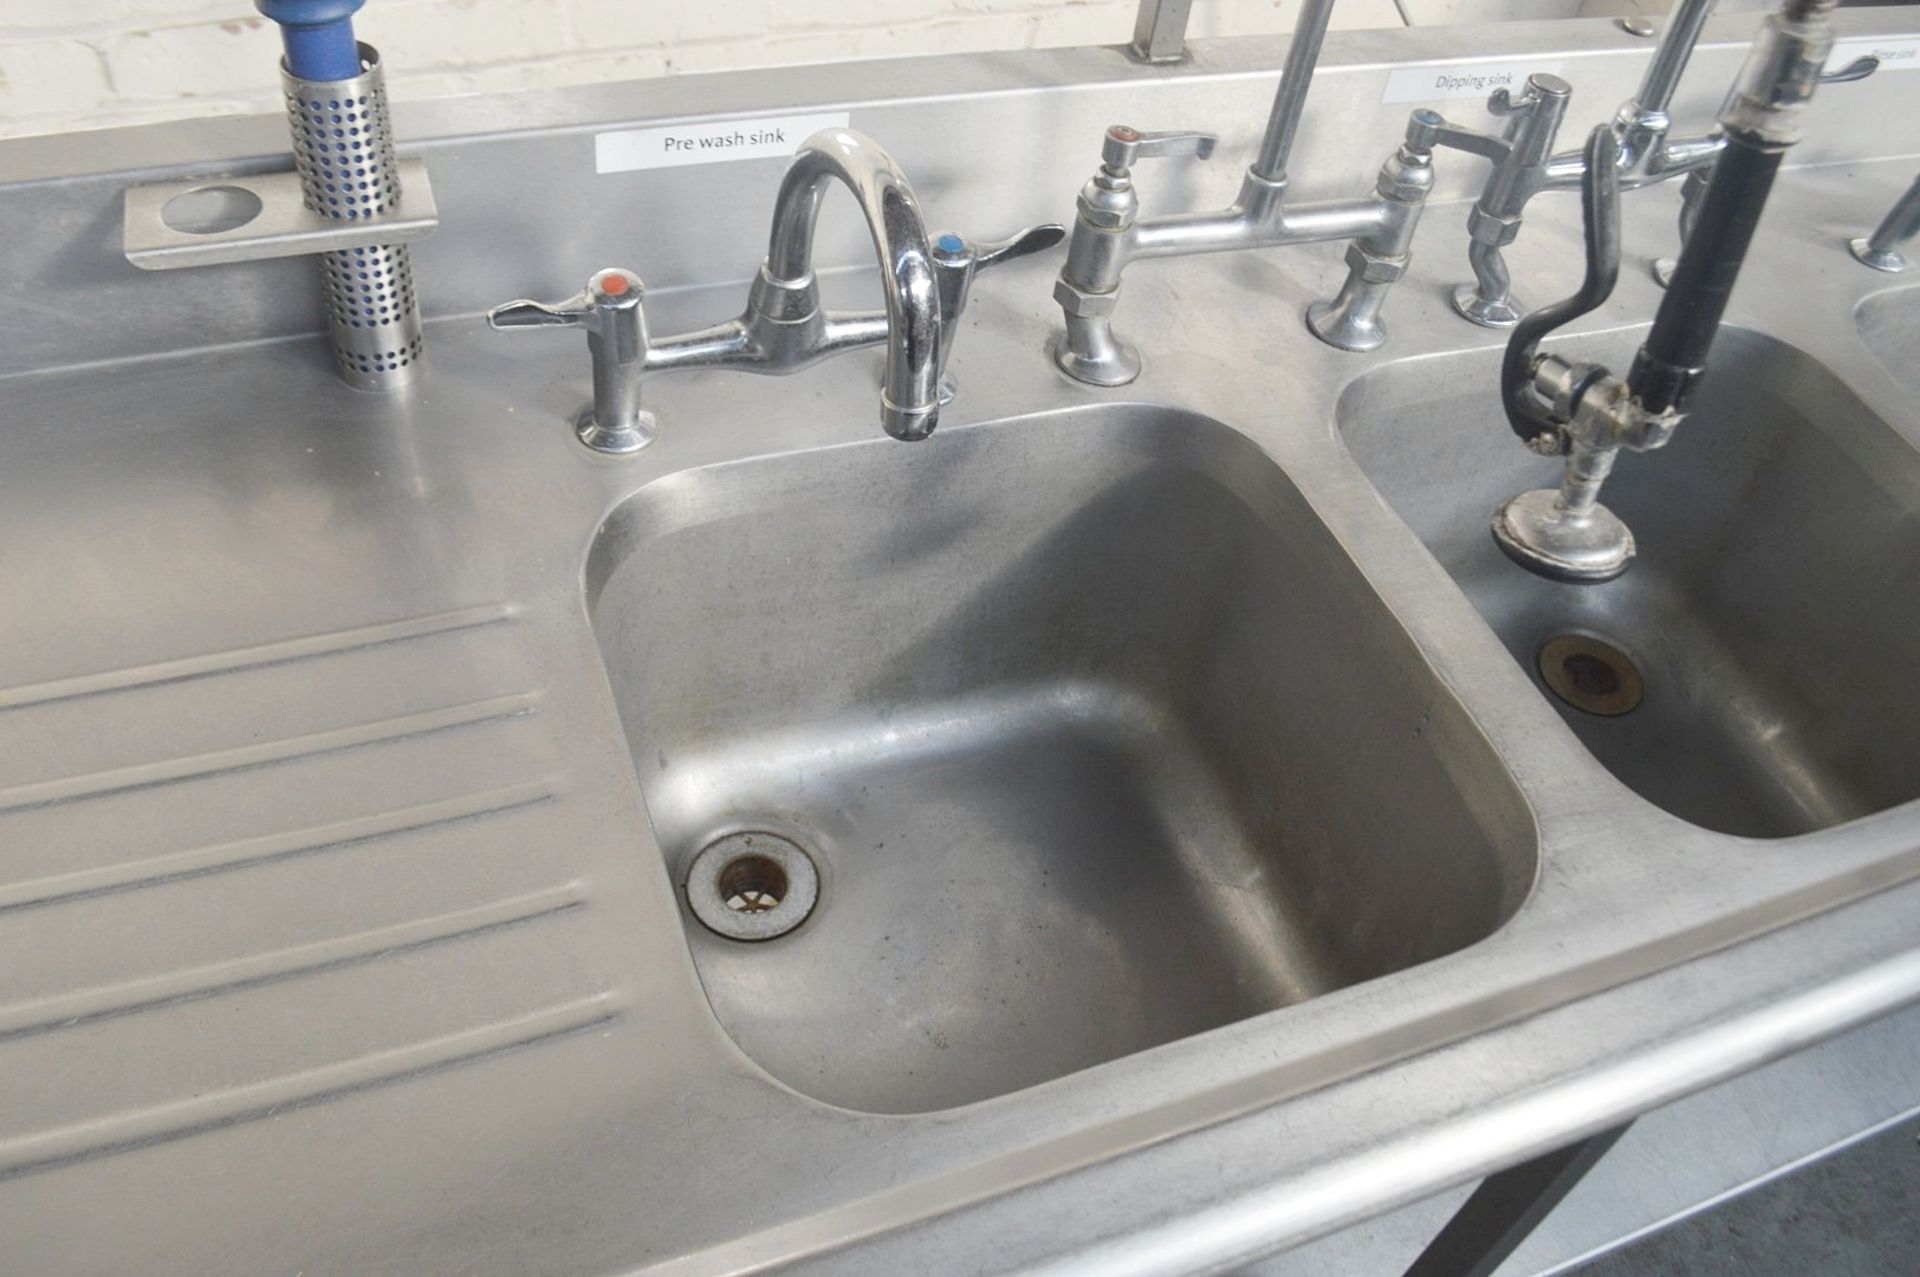 1 x Stainless Steel Commercial Kitchen Triple Pot Wash Sink Unit With Spray Arm - Dimensions: H97 - Image 7 of 9